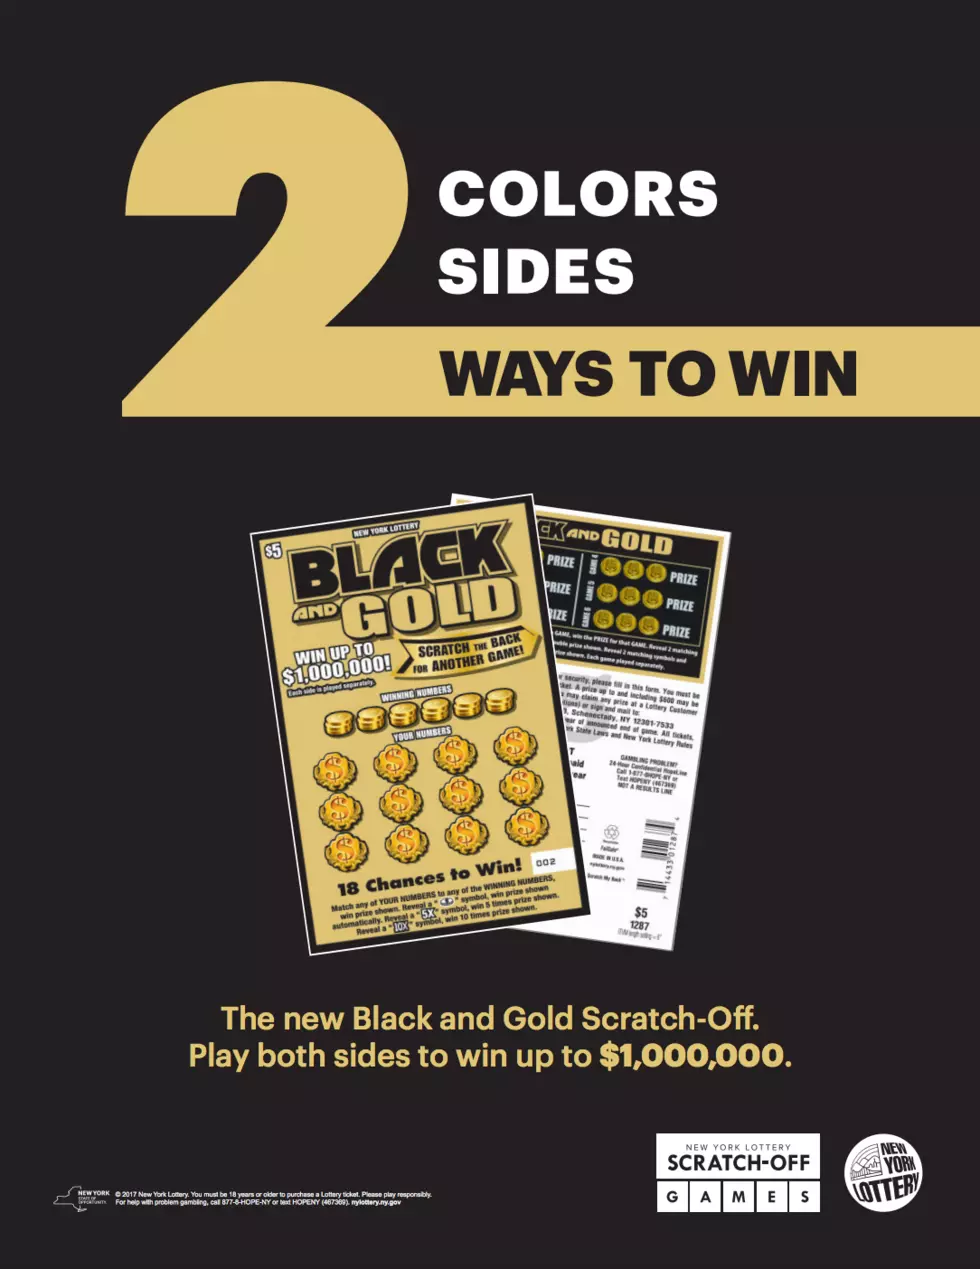 NY Lottery Black and Gold Back-to-Back Contest